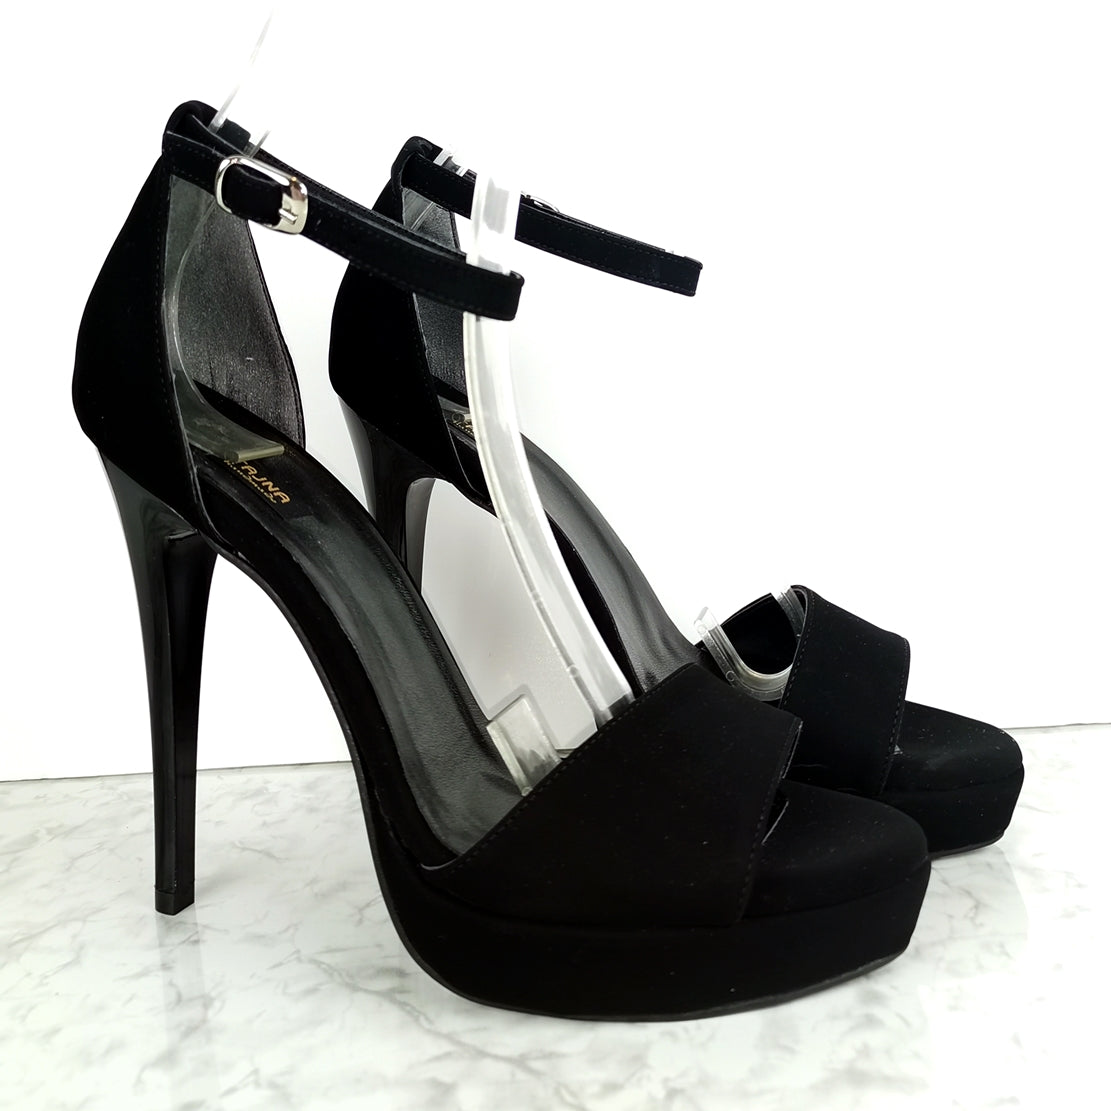 Black Suede 5.11 inches Heel Sandals - Tajna Shoes